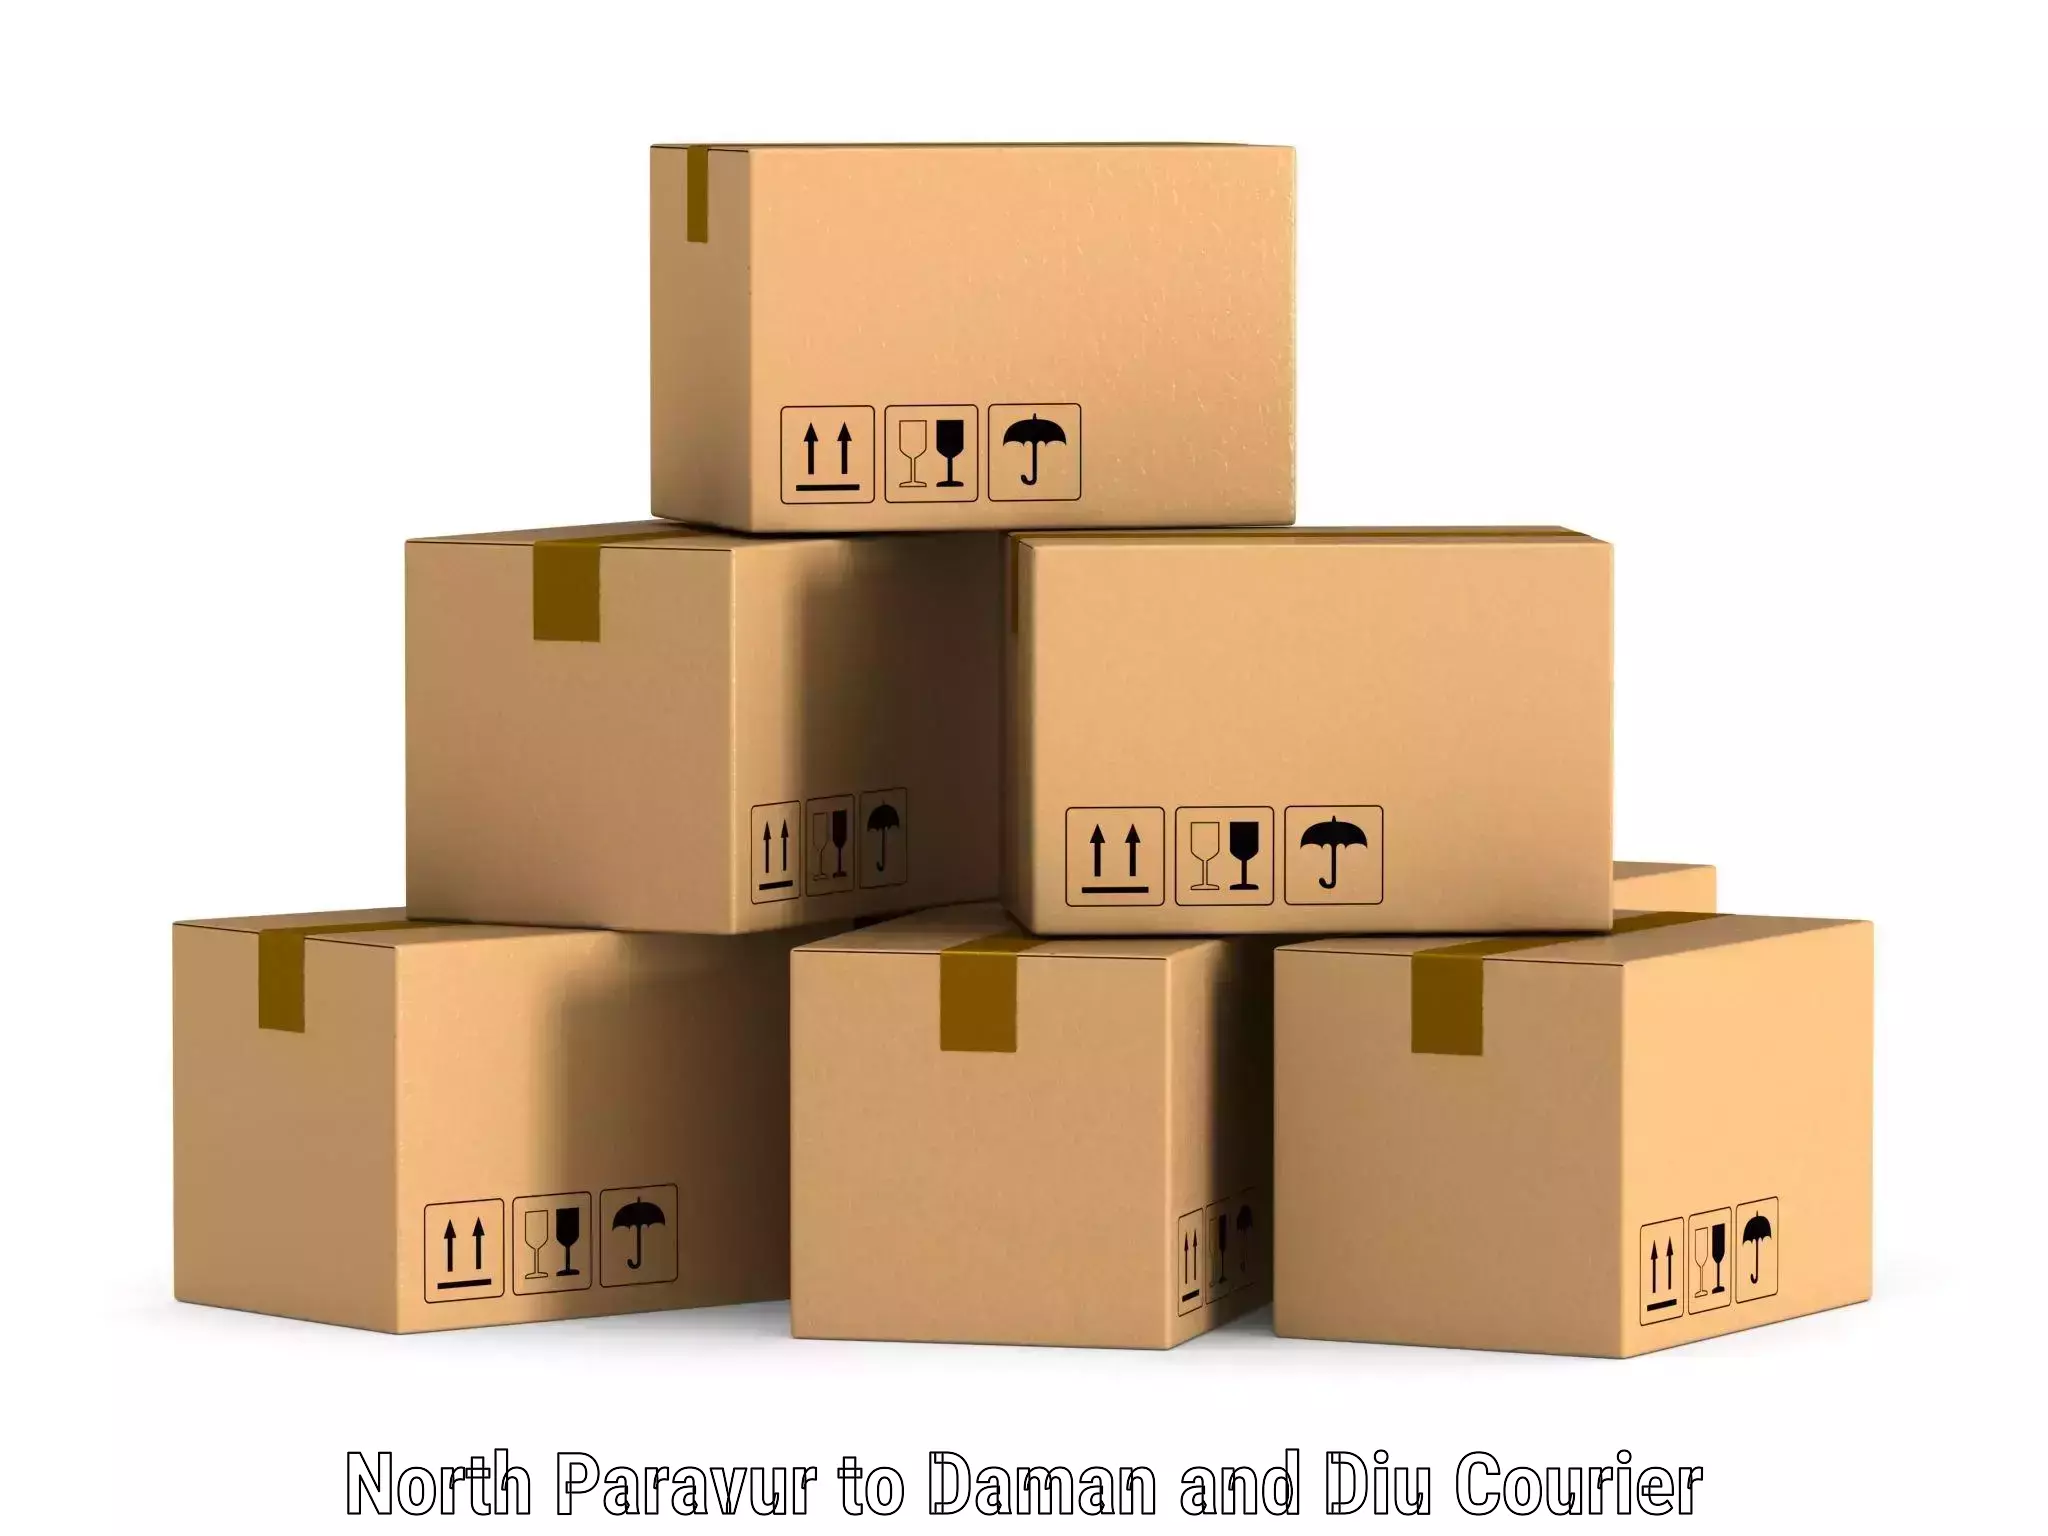 Business shipping needs North Paravur to Daman and Diu